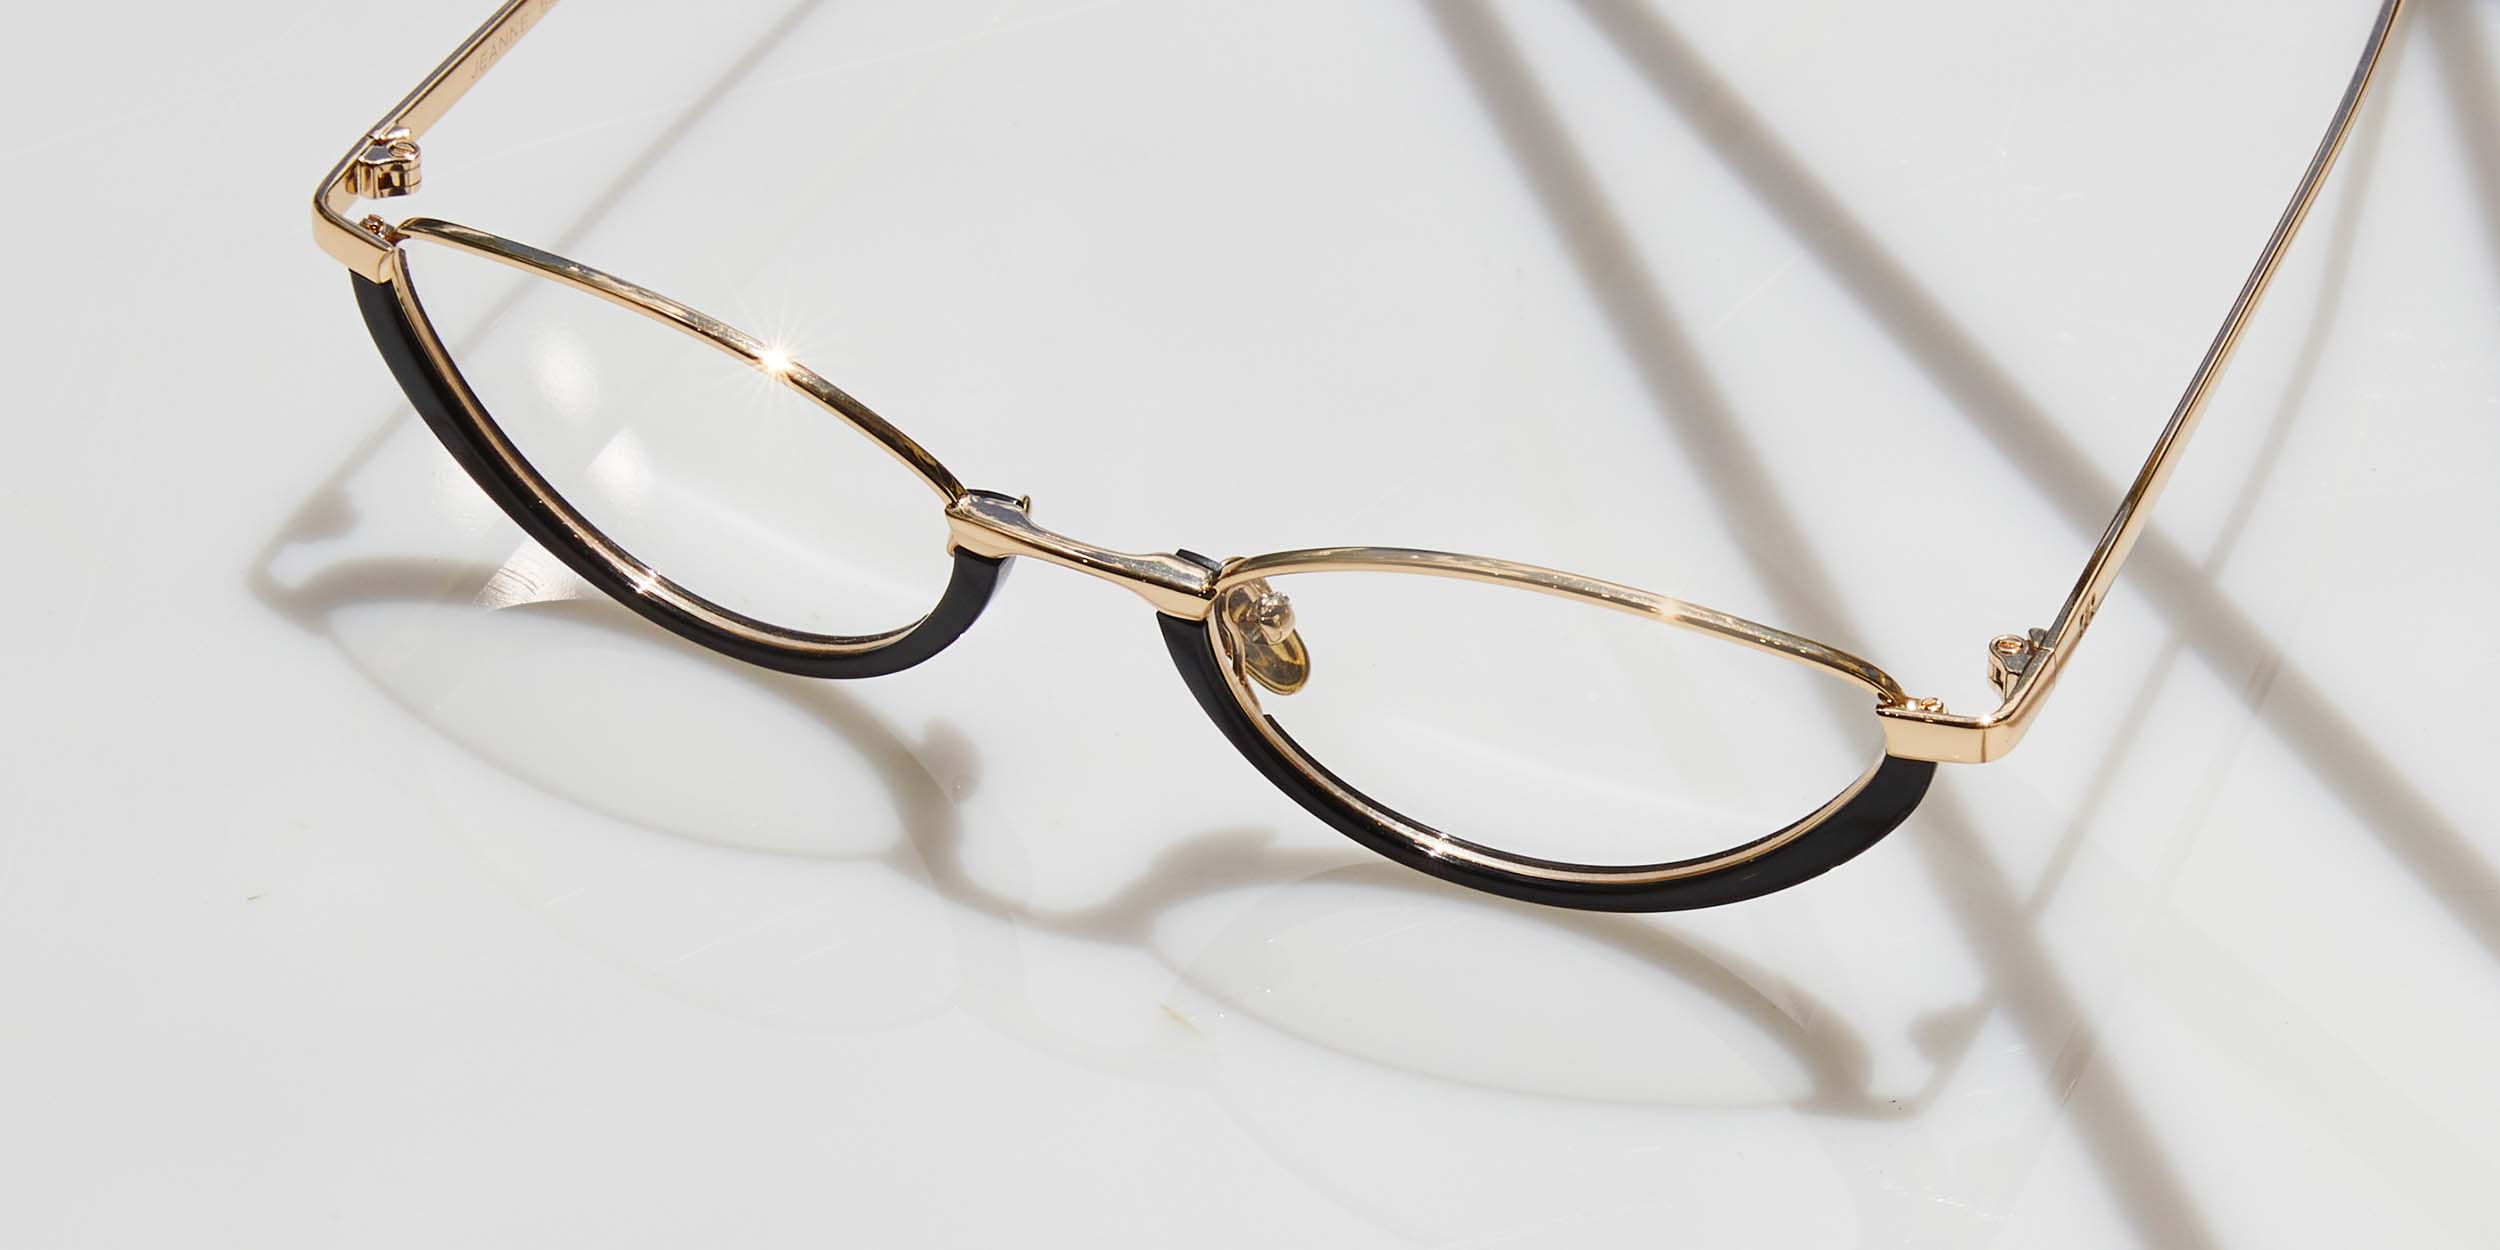 Photo Details of Jeanne Black & Gold Reading Glasses in a room